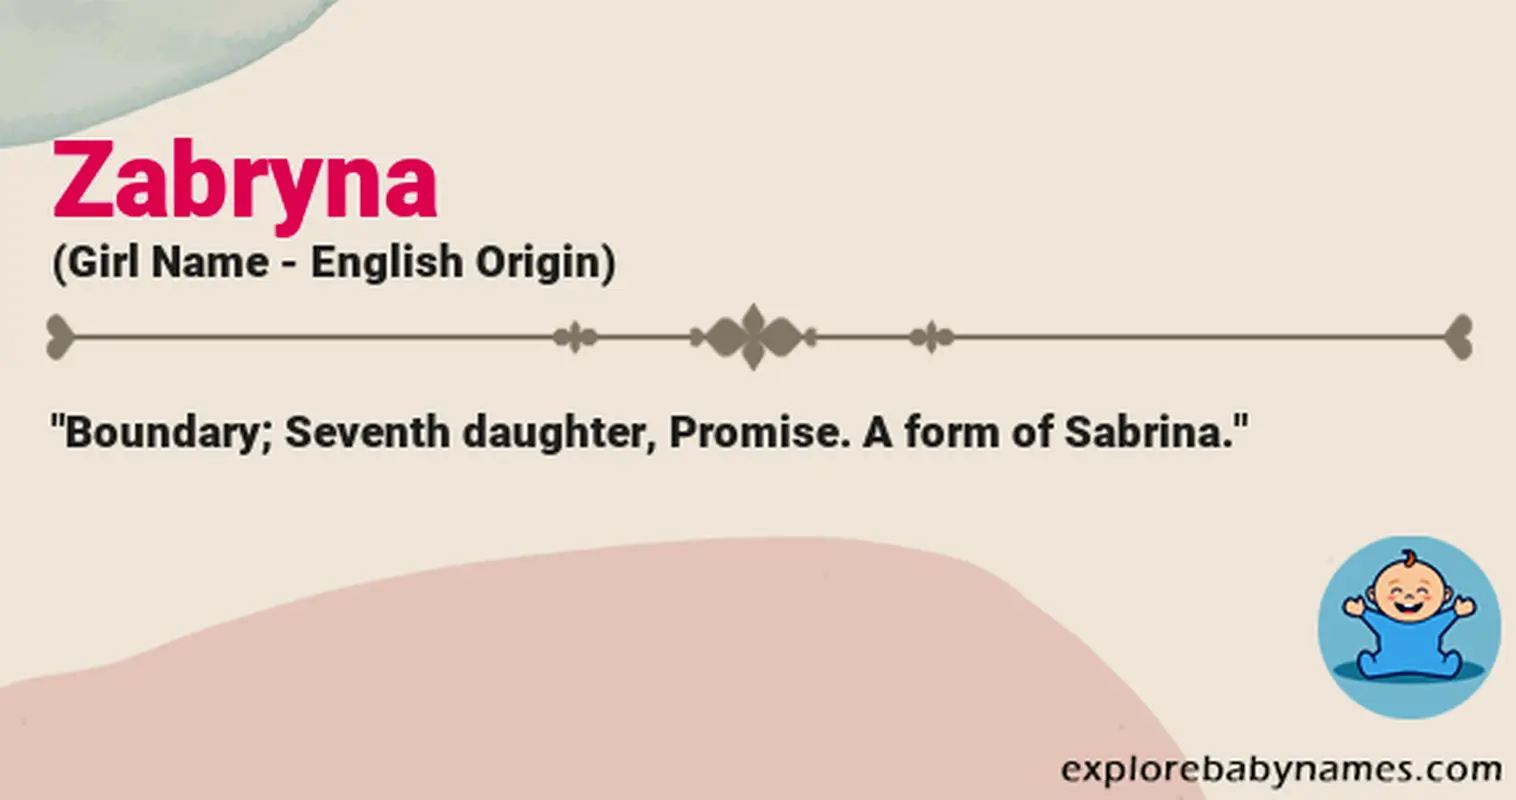 Meaning of Zabryna